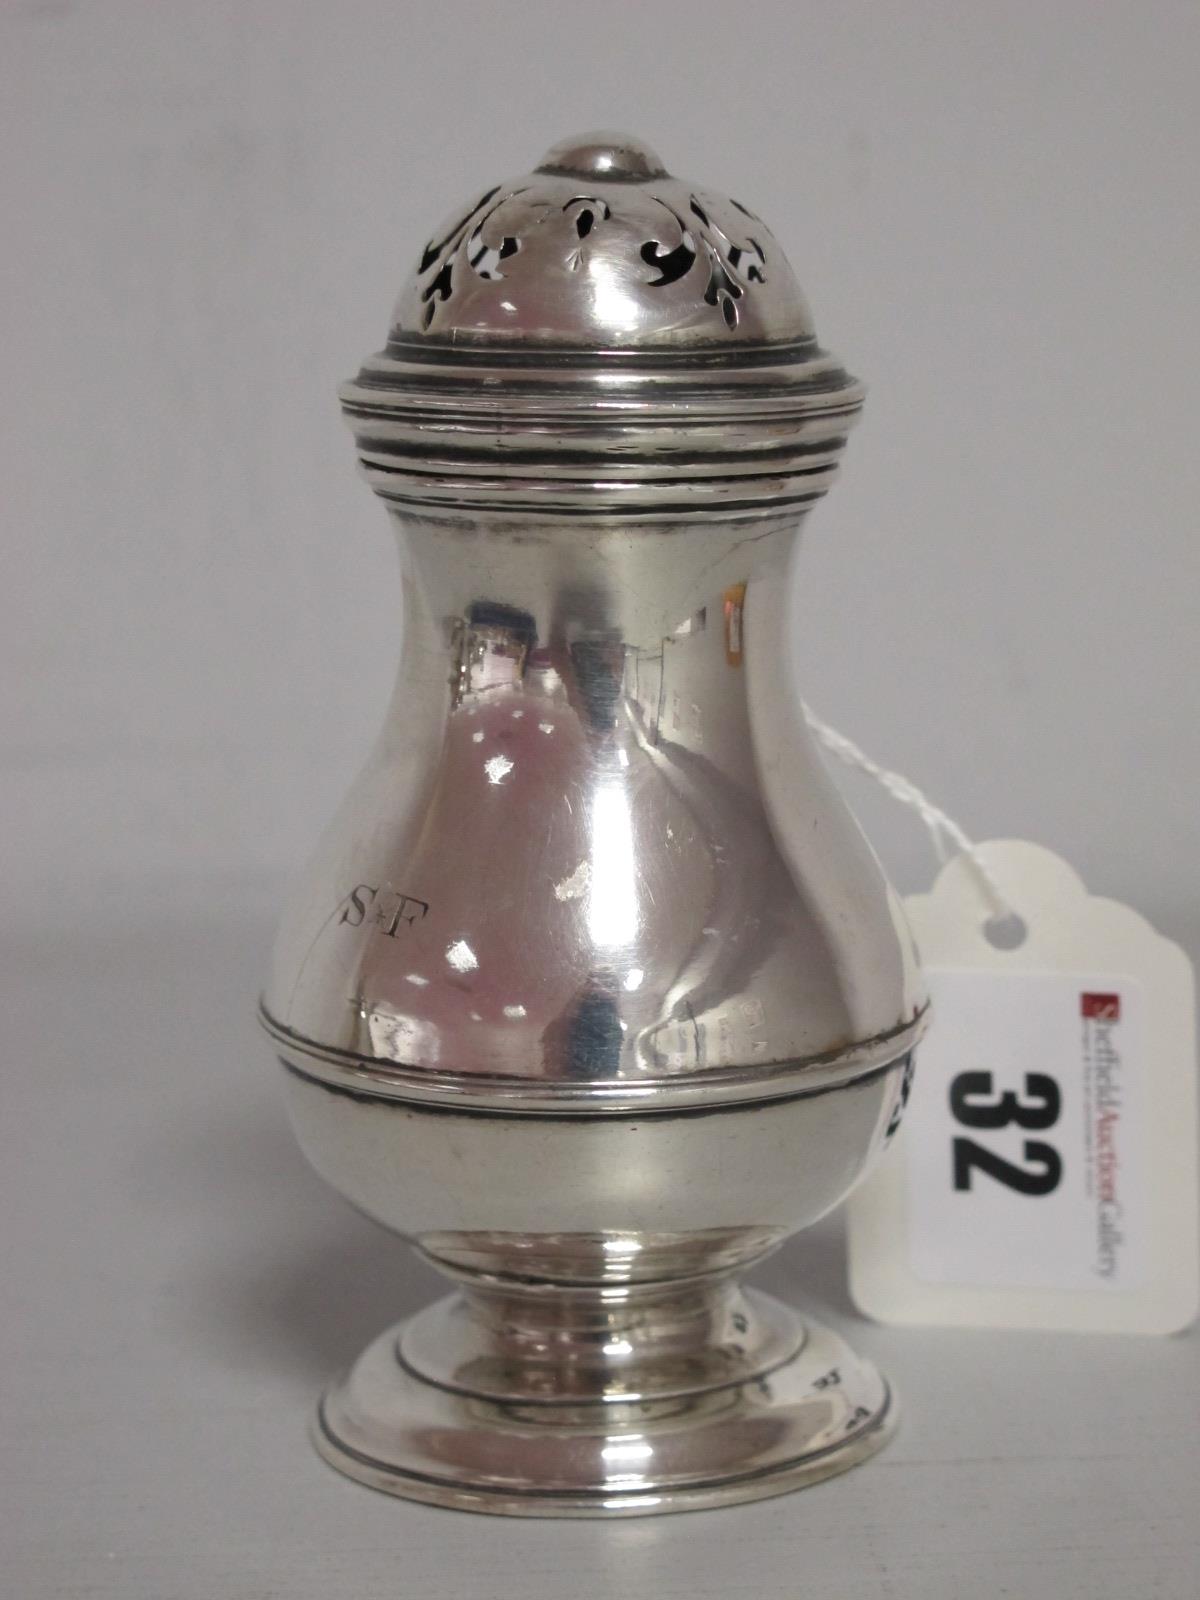 A George II Hallmarked Silver 'Bun' Caster, F.T, London 1725, of plain baluster form, initialled "